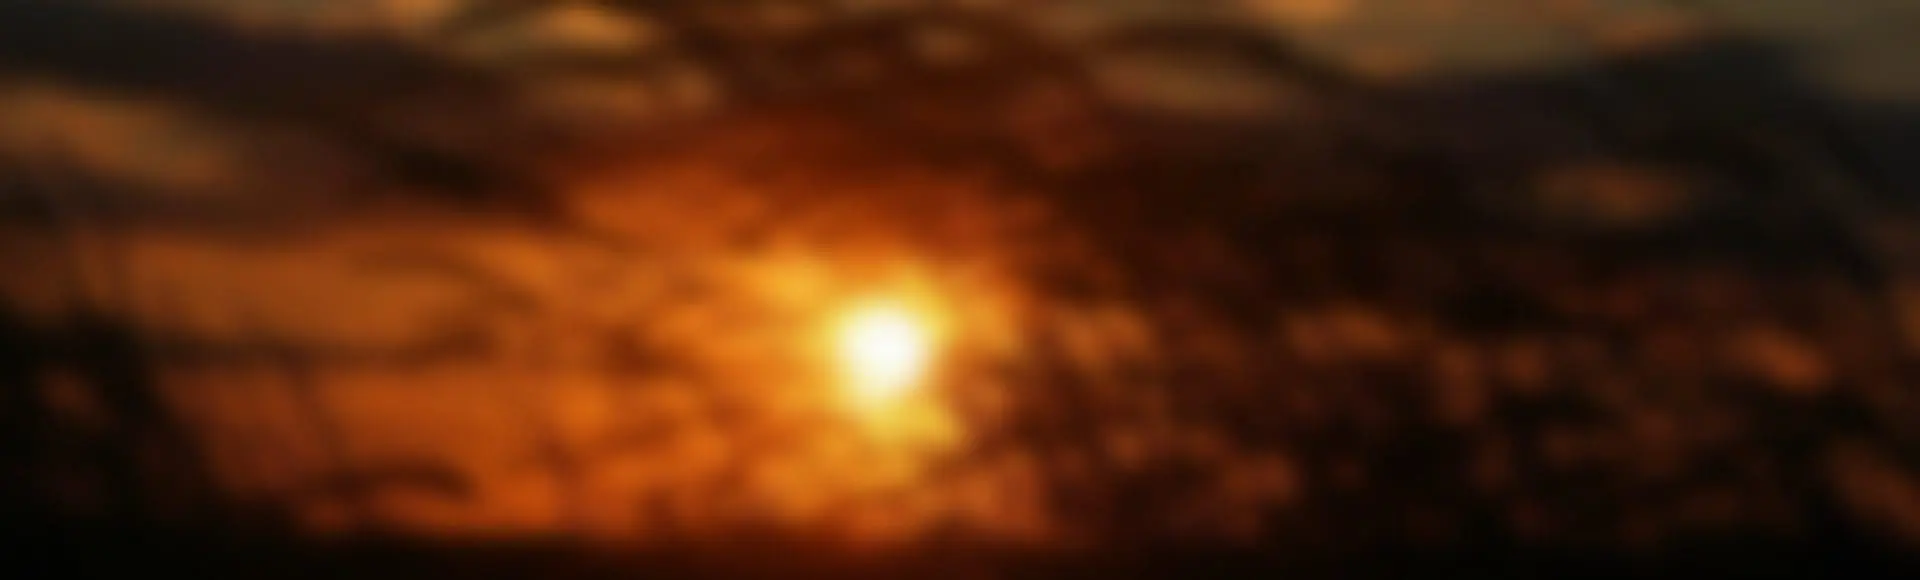 A blurry image of the sun setting in the sky.